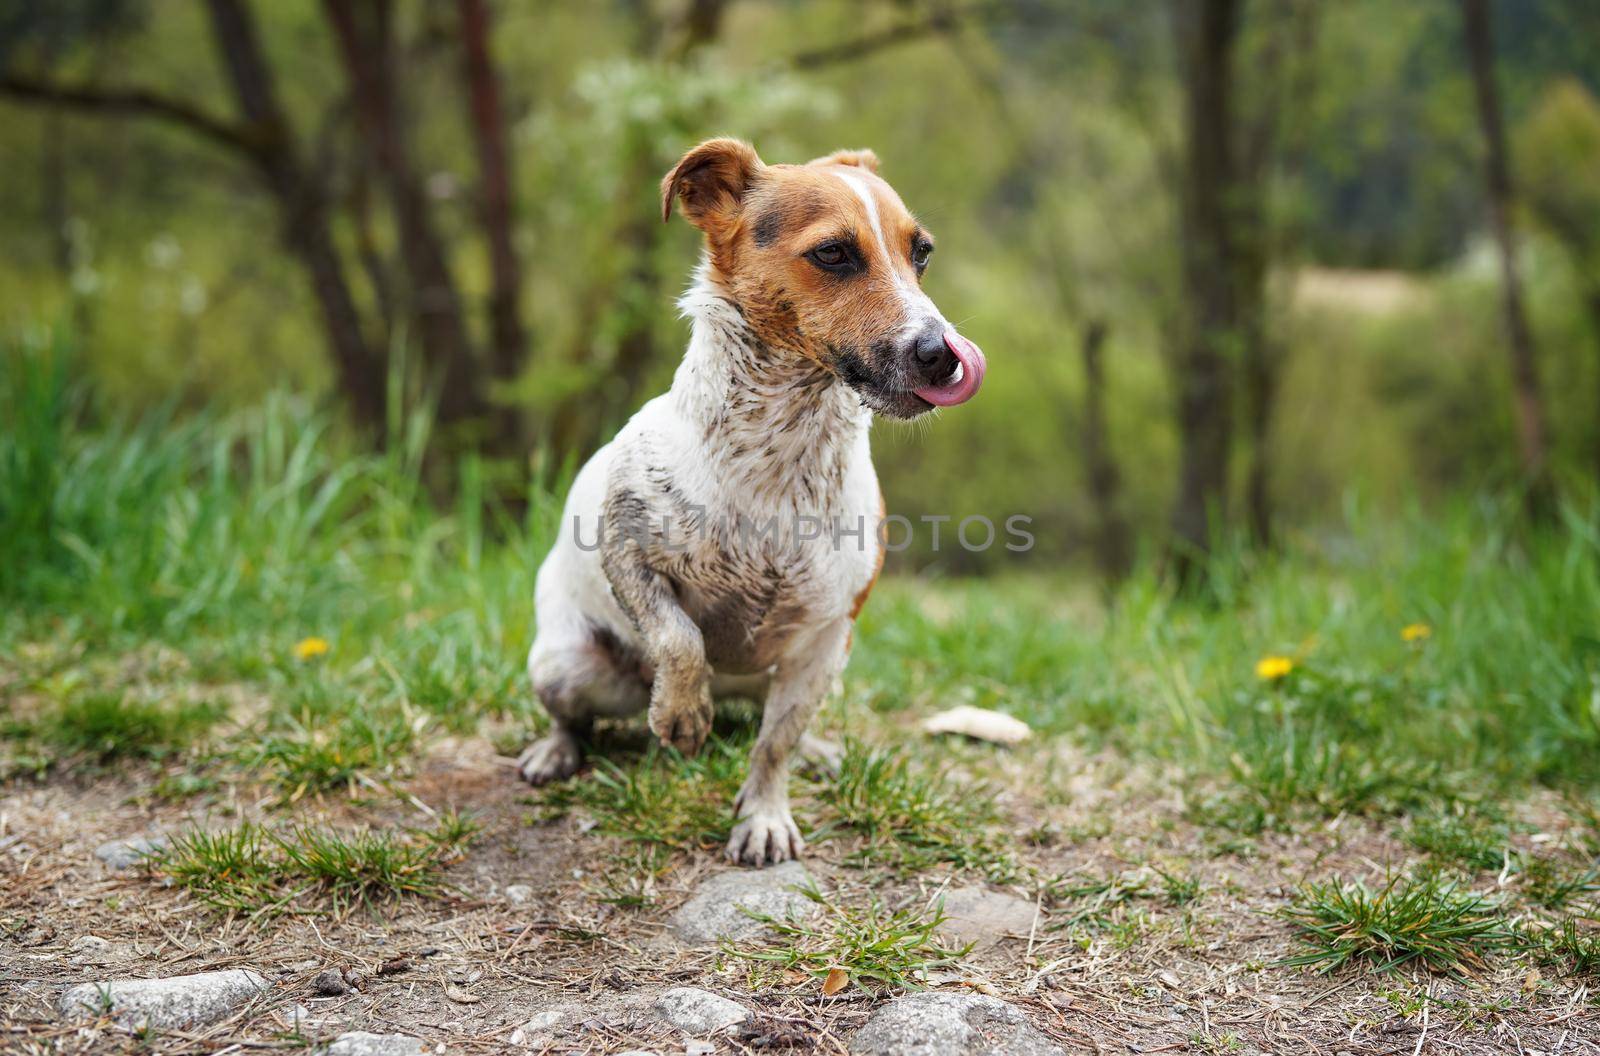 Small Jack Russell terrier sitting on ground, her fur very dirty, licking nose with tongue, grass and trees background by Ivanko